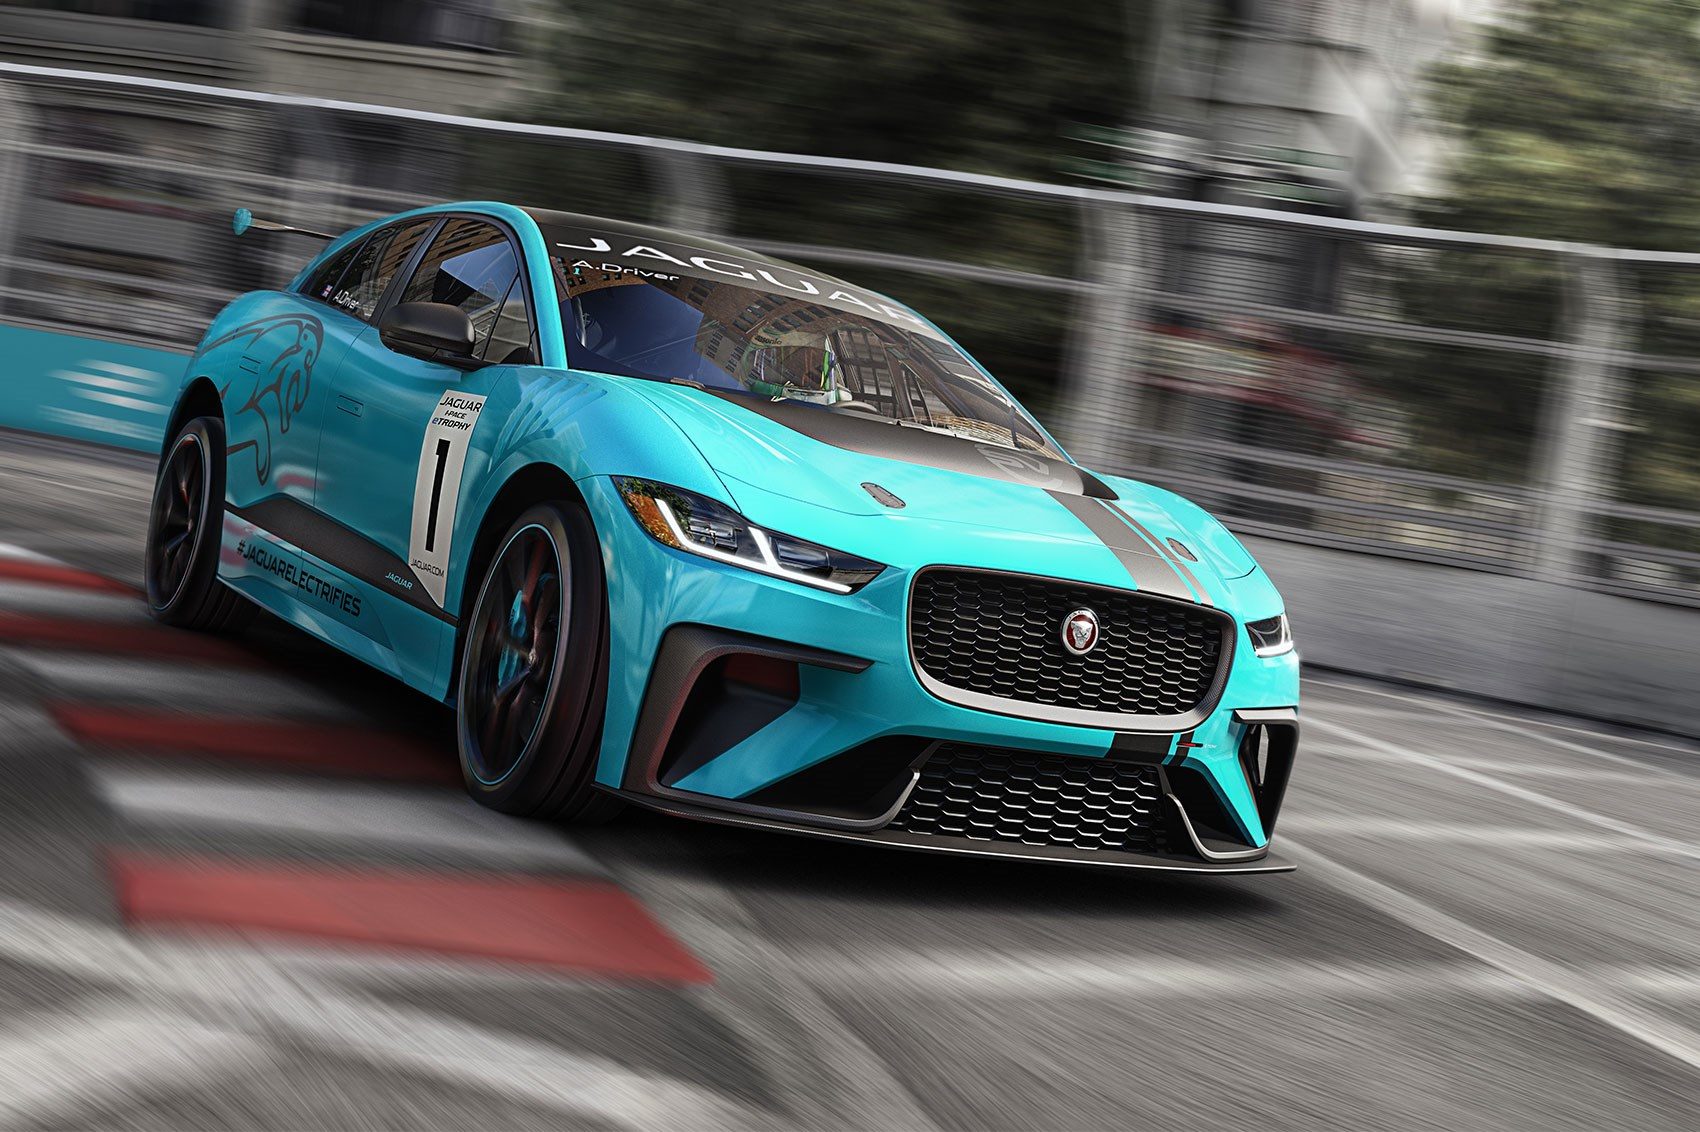 jag_ipace_etrophy_004.jpg